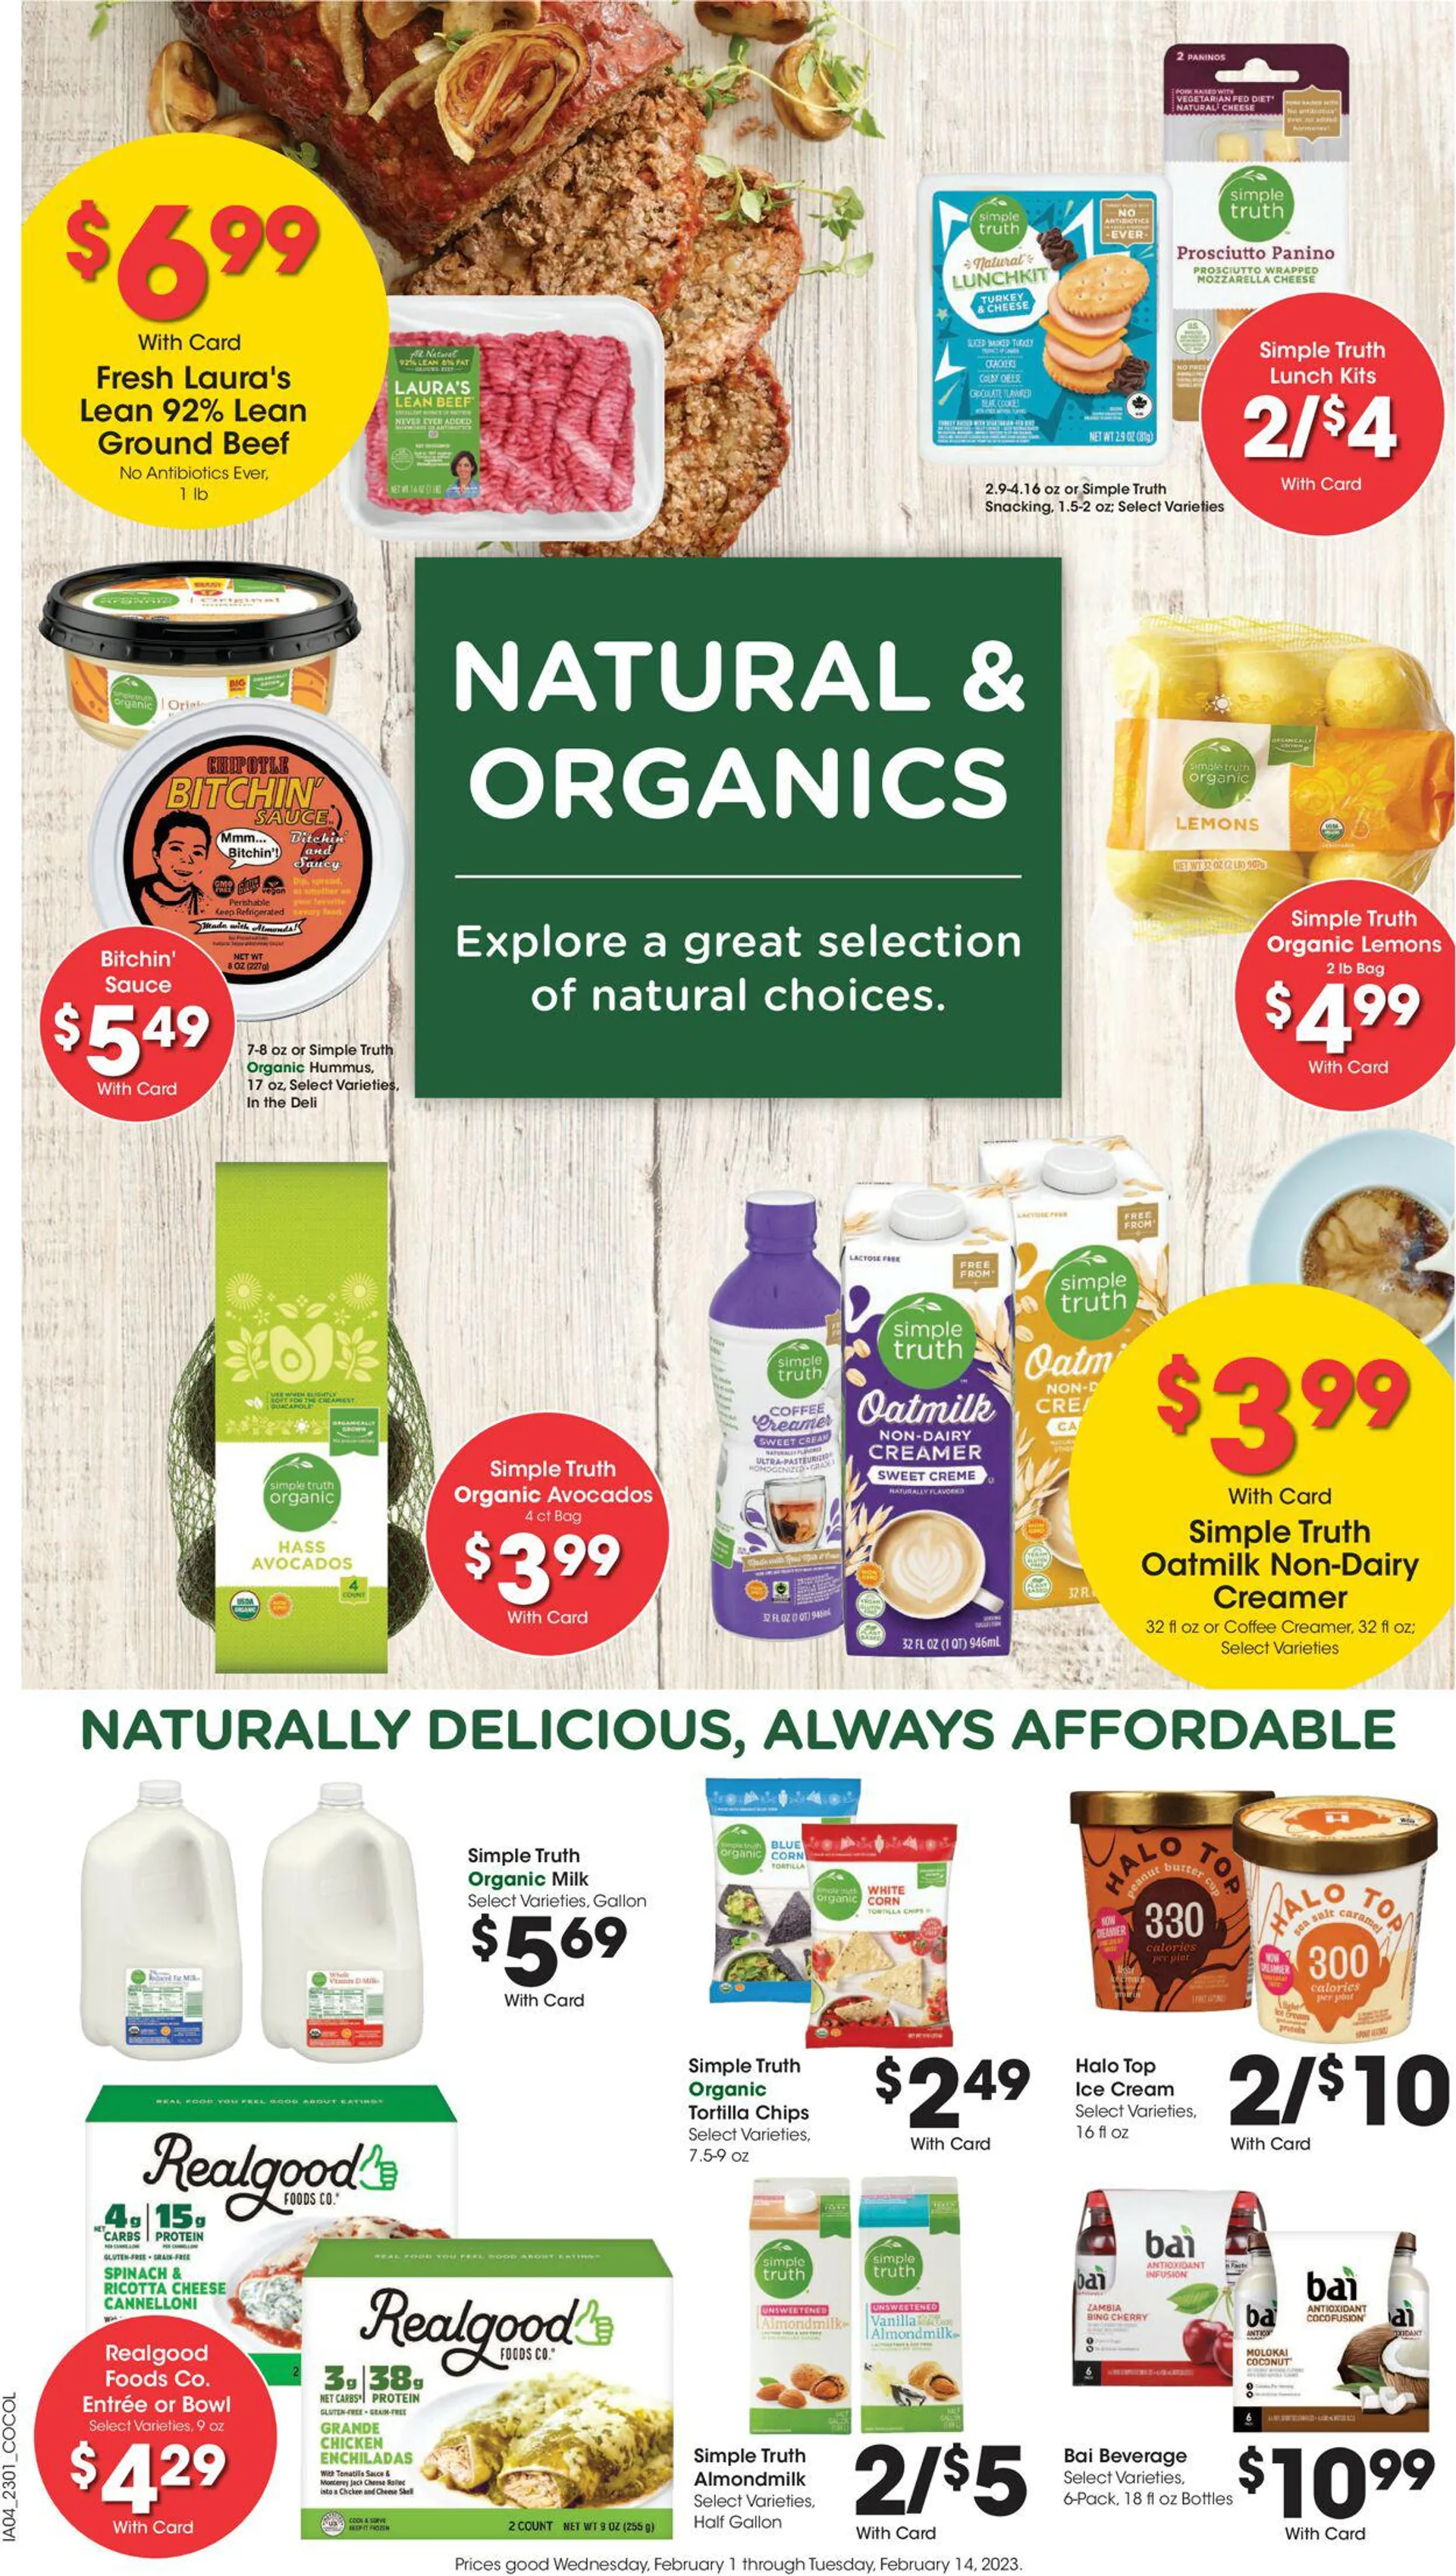 Kroger Current weekly ad - 11